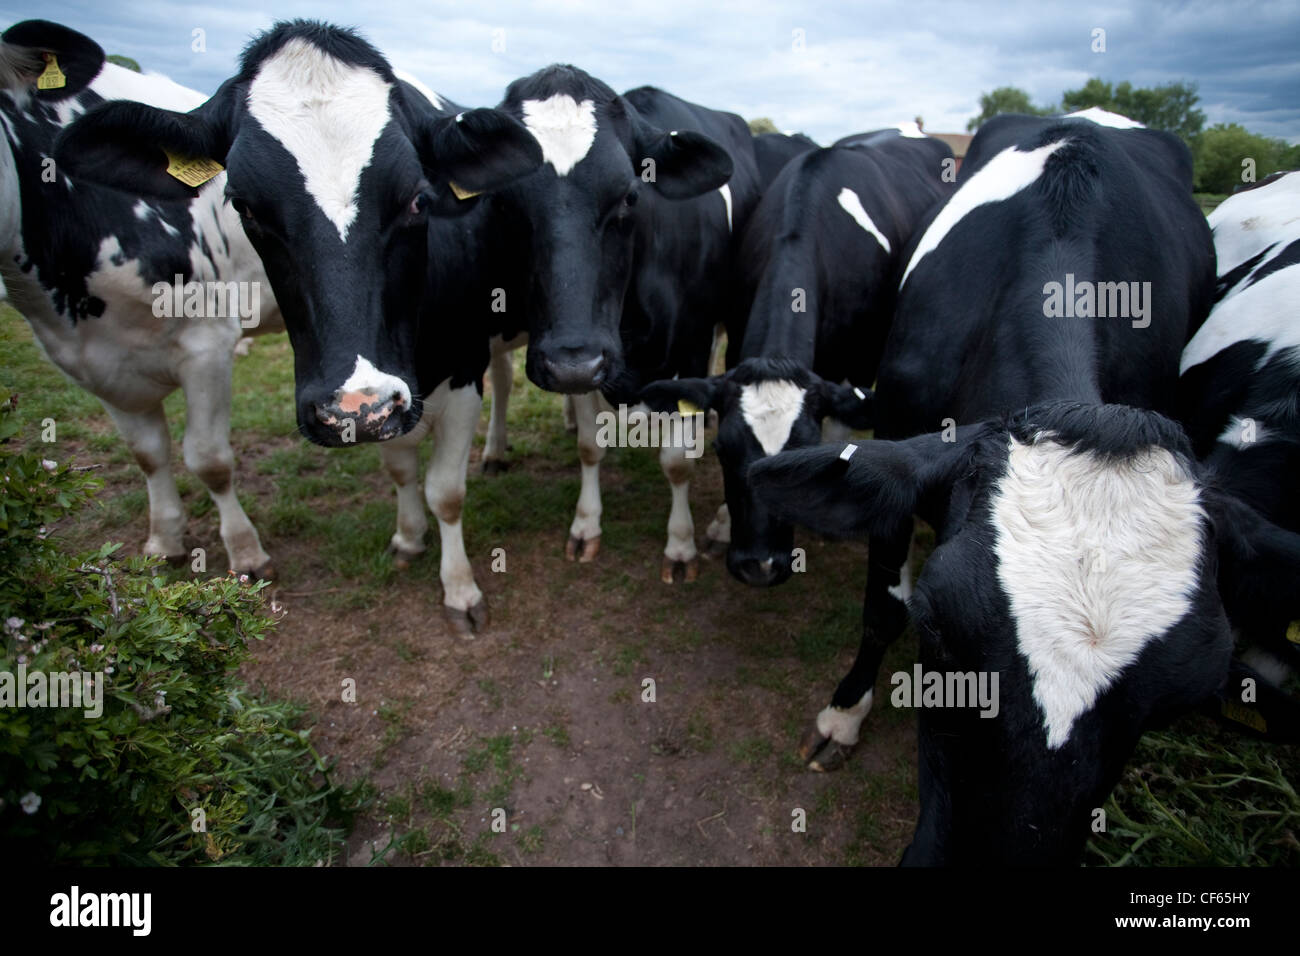 A herd of Holstein cattle (Bos primigenius). Stock Photo